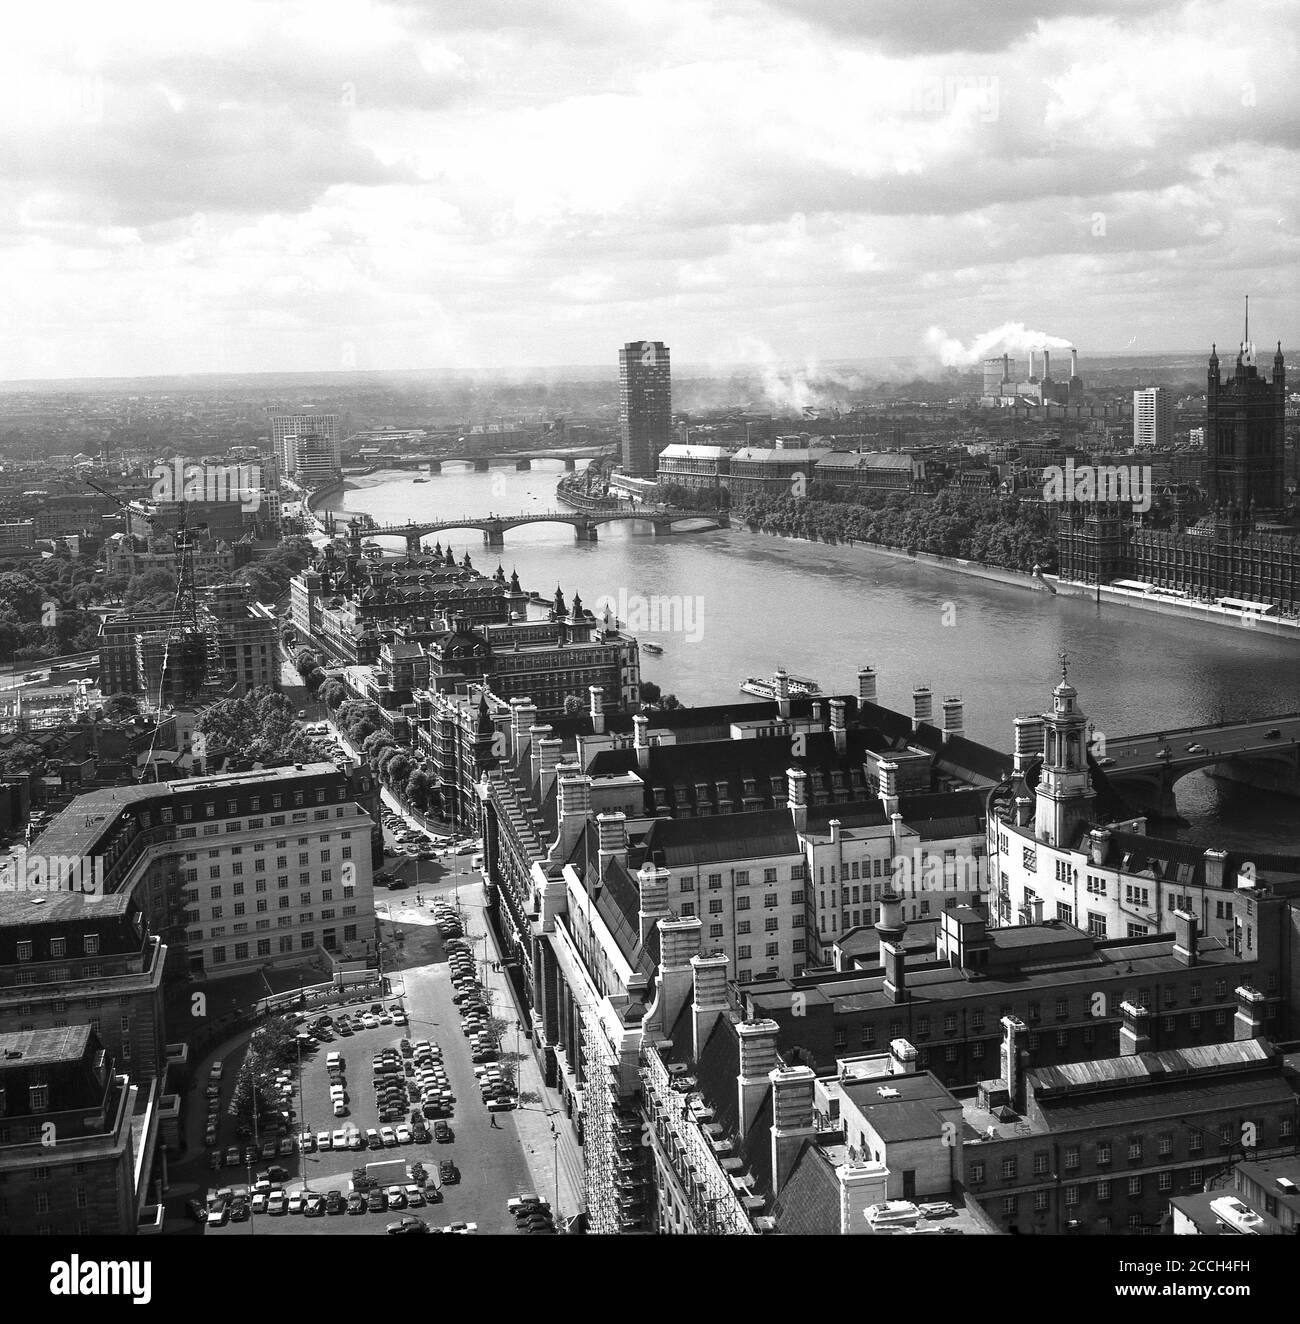 1960s, historical, Post-war view of the skyline of the city of London, as seen from the South across the river Thames. A new 'modern' high-rise tower block, of which many were built in this era, can be seen by the river, its great height above all the other buildings already leaving a distinctive mark on the surrounding landscape and skyline.  The smoking chimneys of Battersea Power station can be seen in the distance, with the Palace of Westimnister, the two Houses of the UK Pariament on the far right. Stock Photo